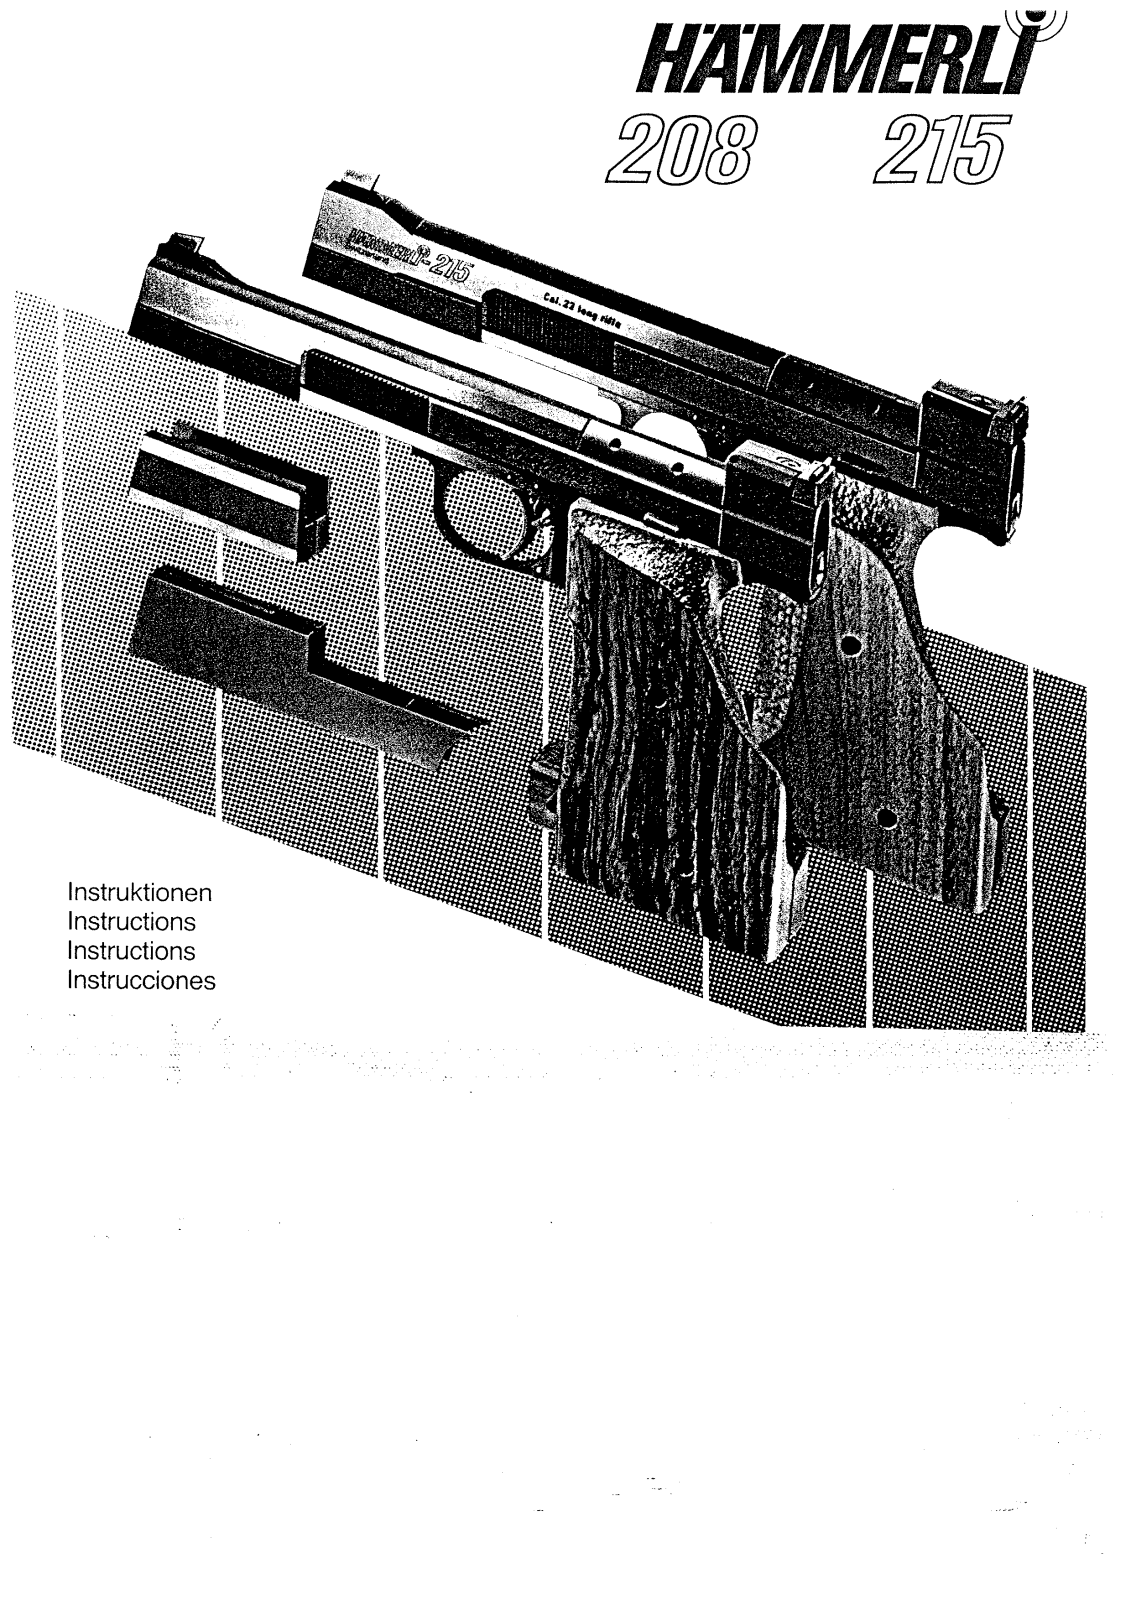 Walther Hammerli 208 Instruction Manual